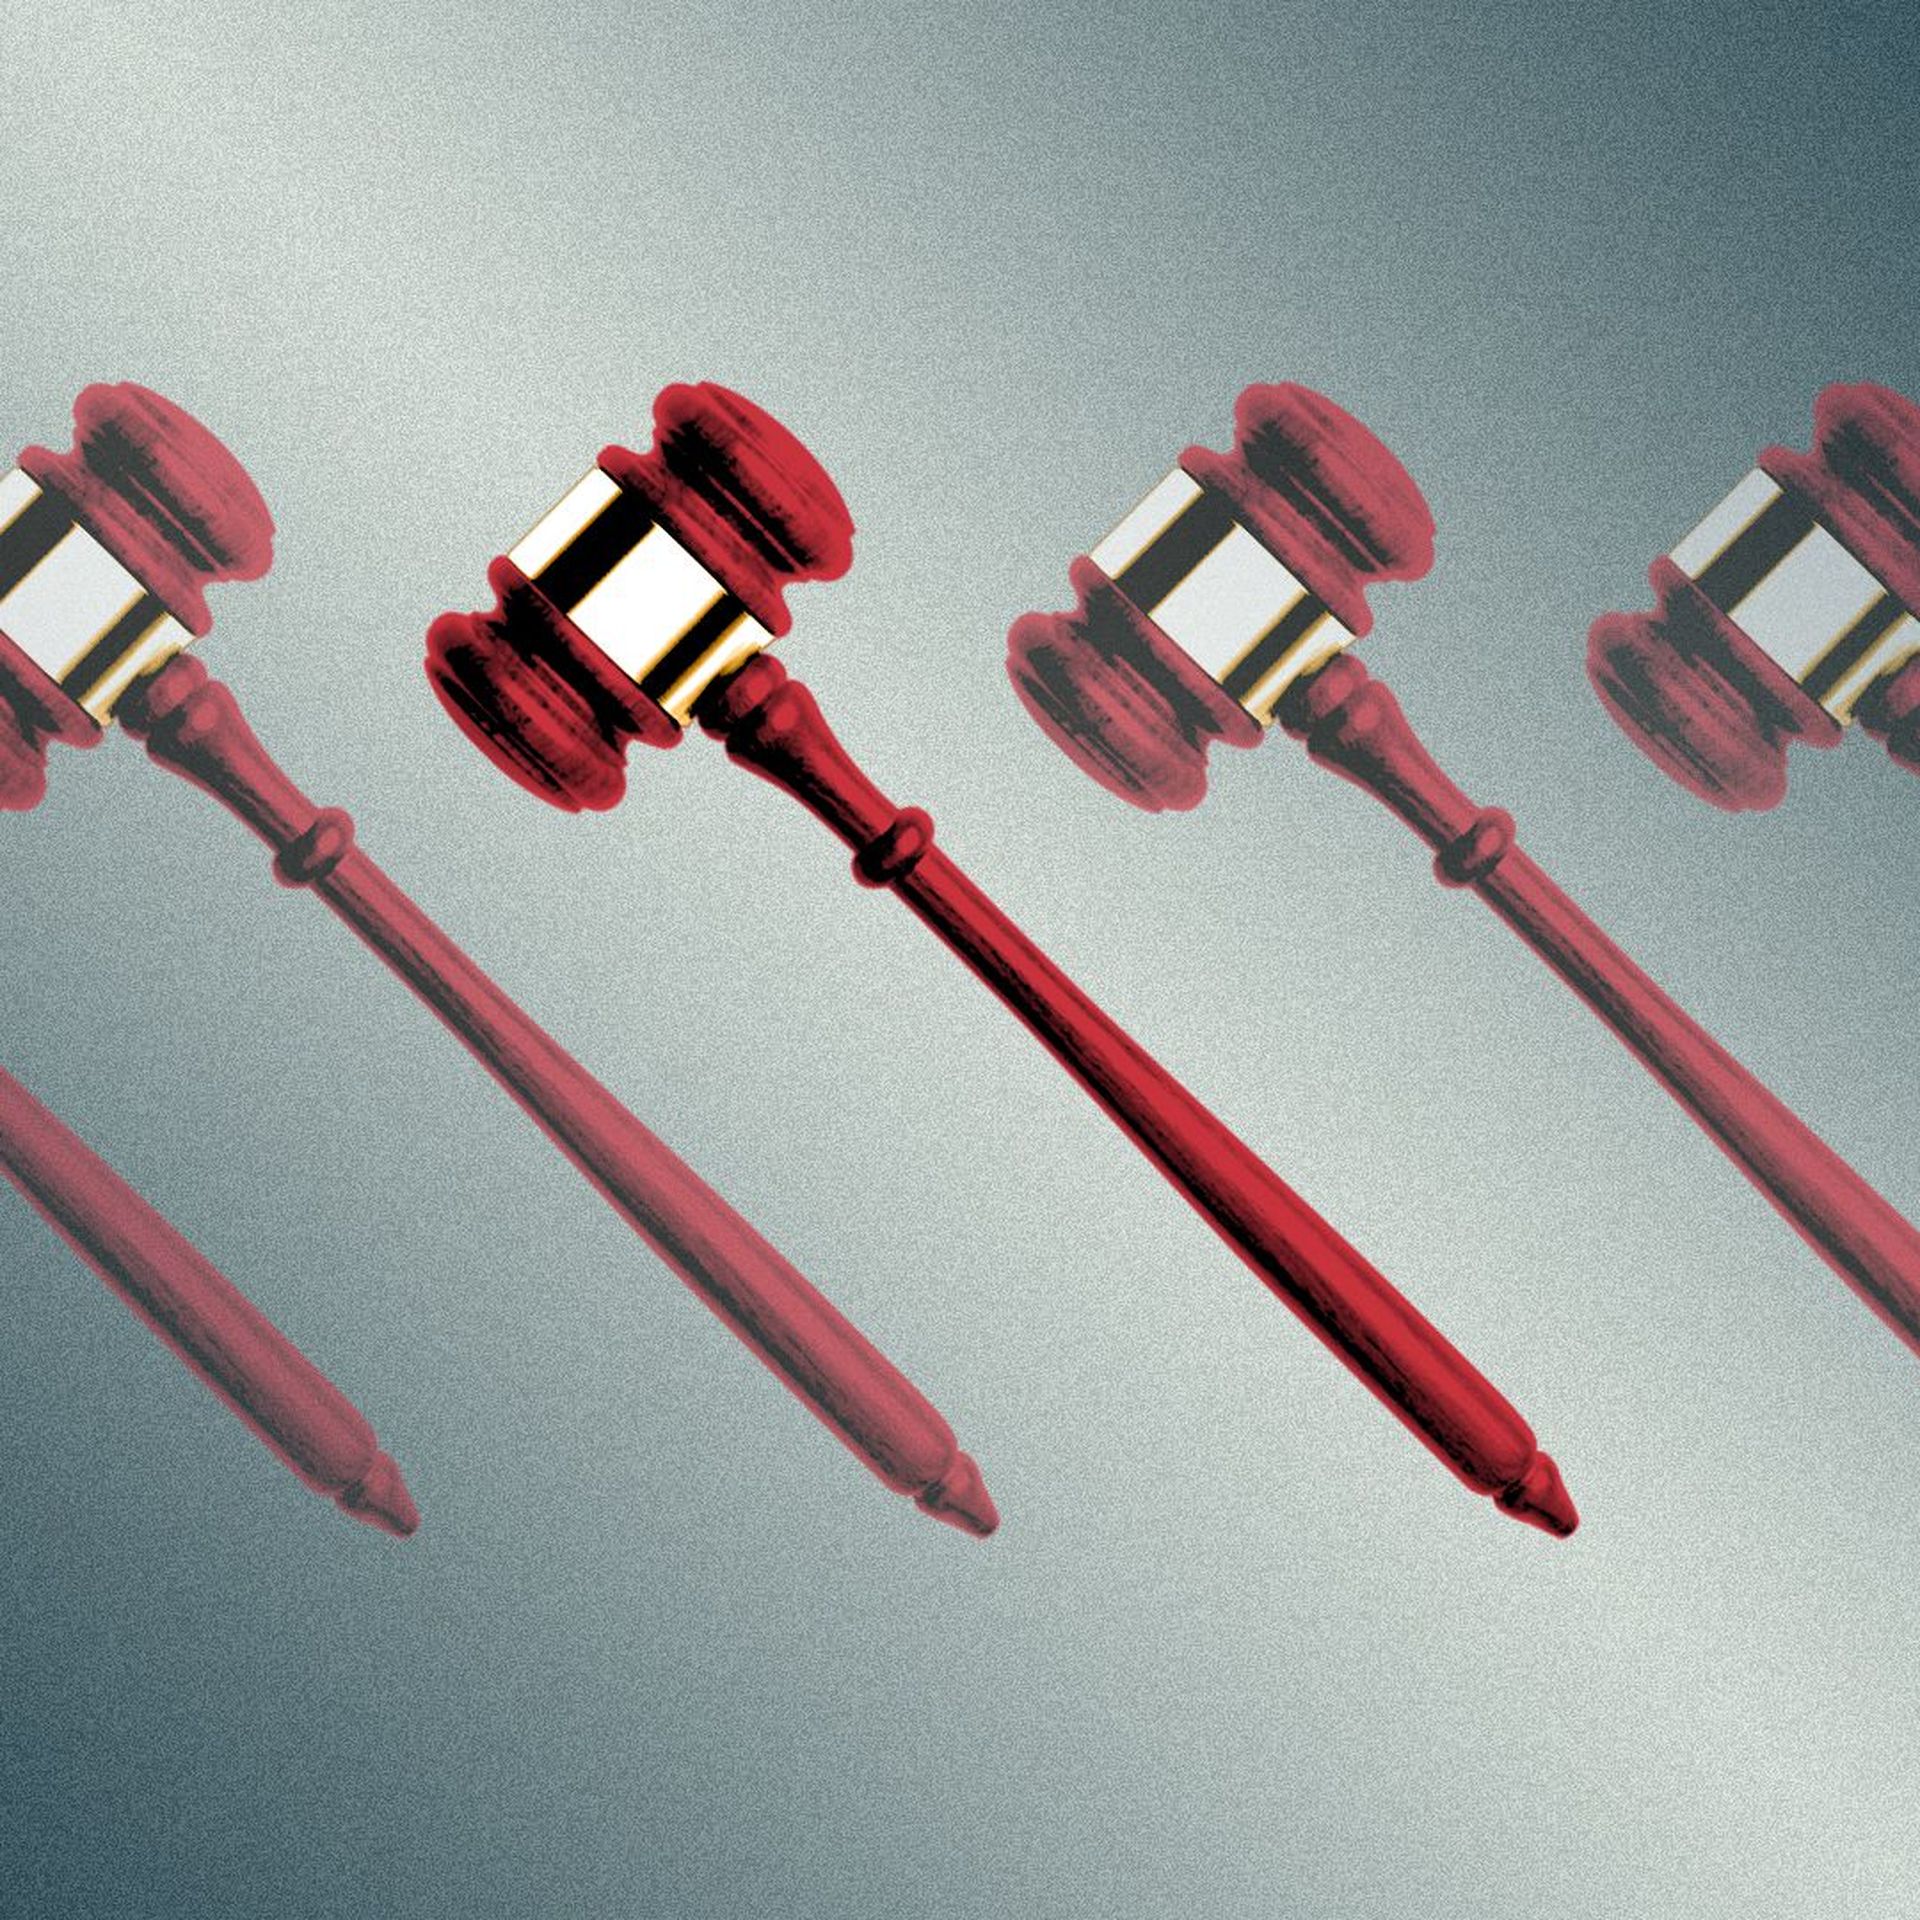 Illustration of a row of gavels, with all but one of them transparent.